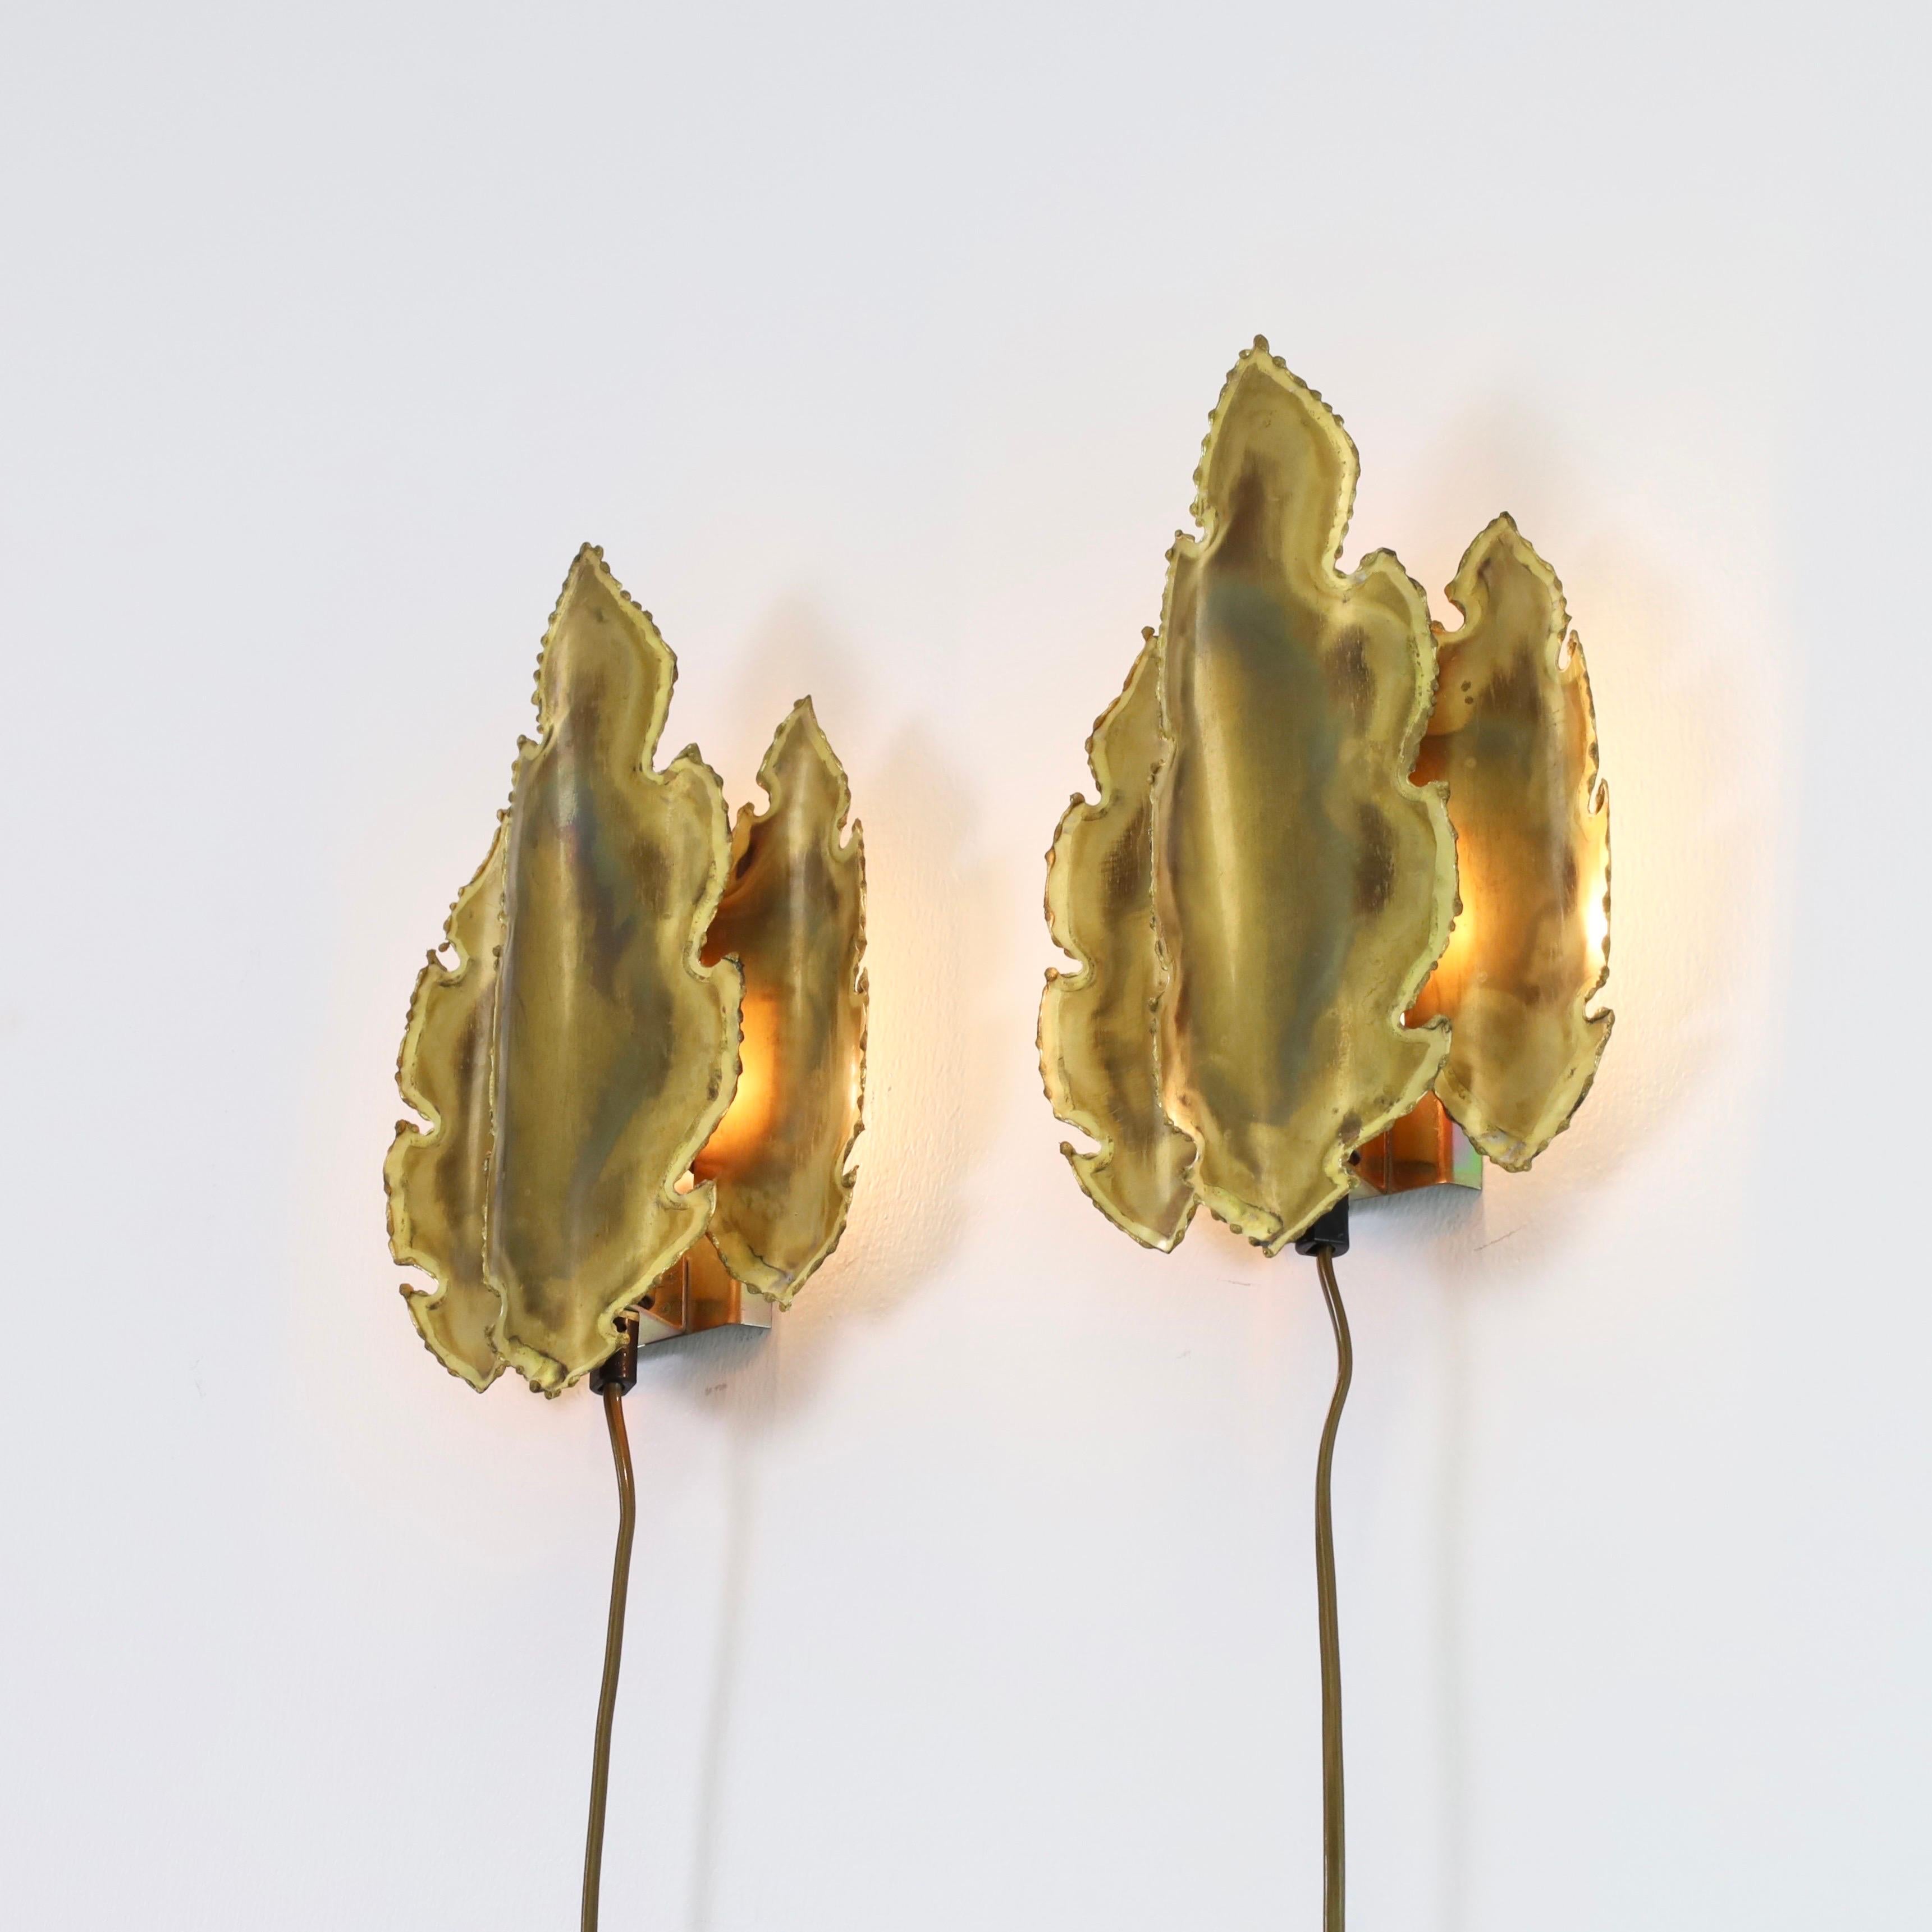 Metal Pair of Leaf-Shaped Brass Wall Lamps by Svend Aage Holm Sorensen, 1960s, Denmark For Sale